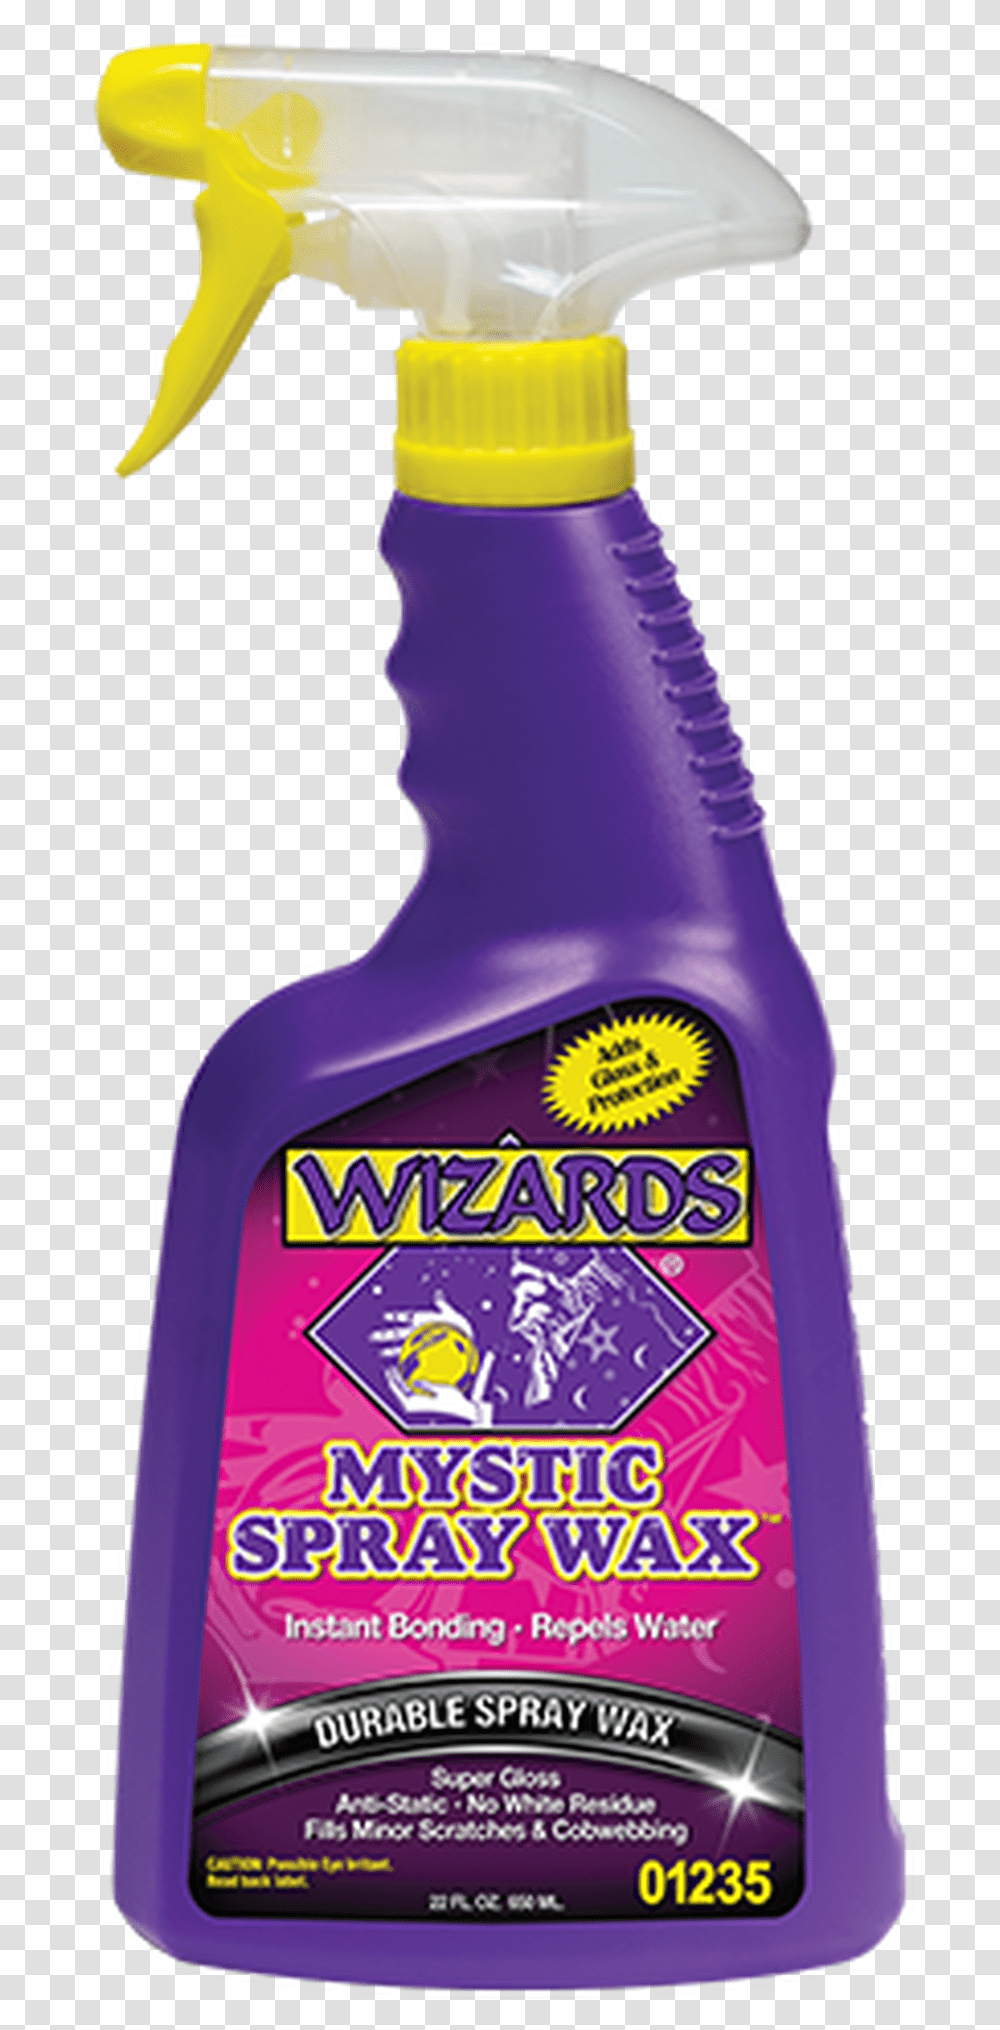 Wizards Mystic Spray Wax 22 Oz Wizards Products, Bottle, Cosmetics, Label Transparent Png